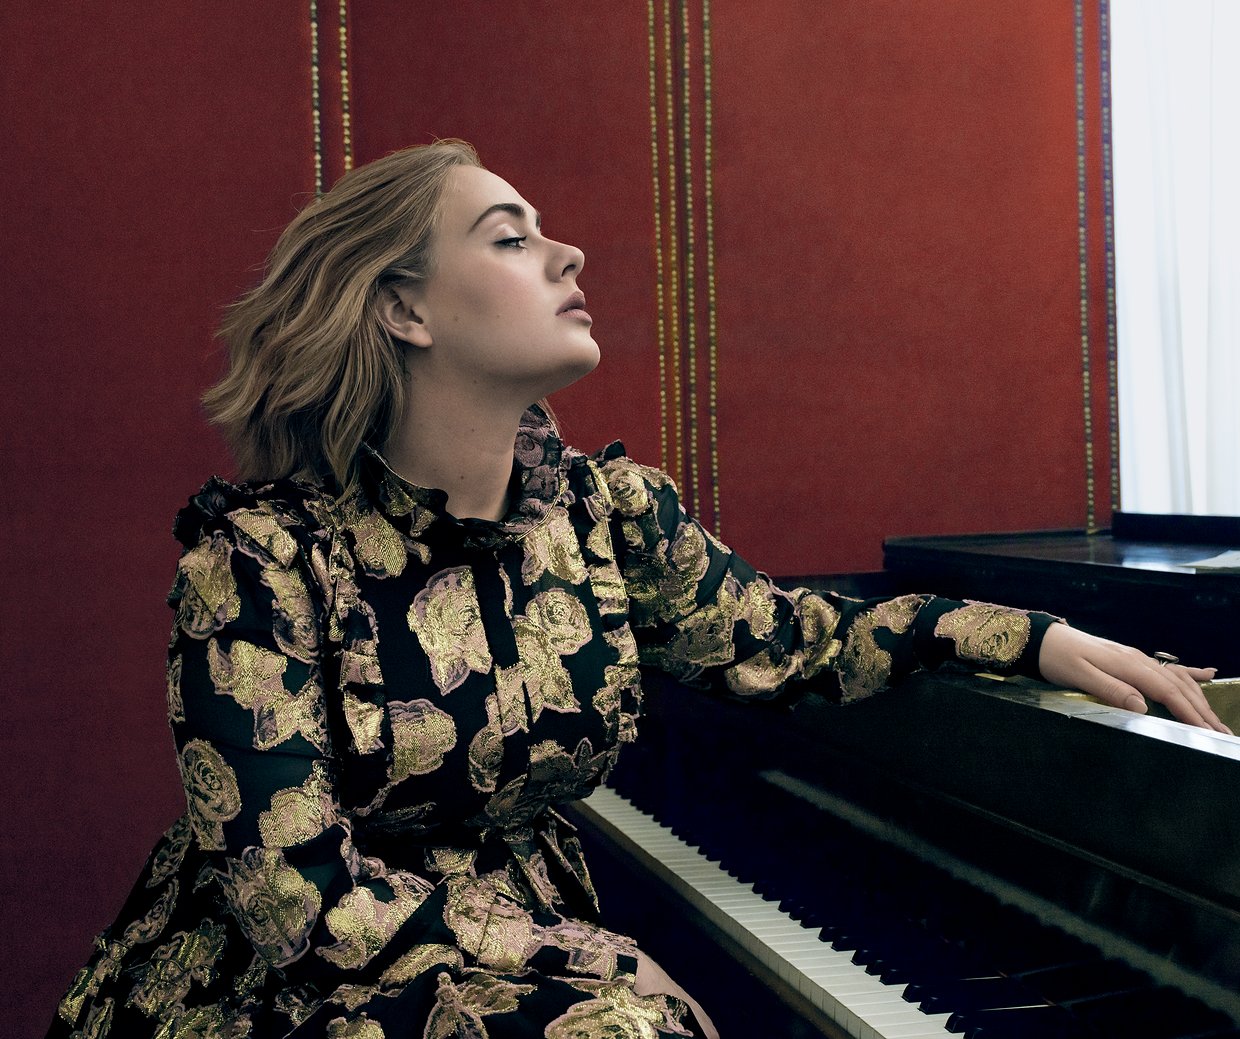 Adele on cover of VOGUE 2